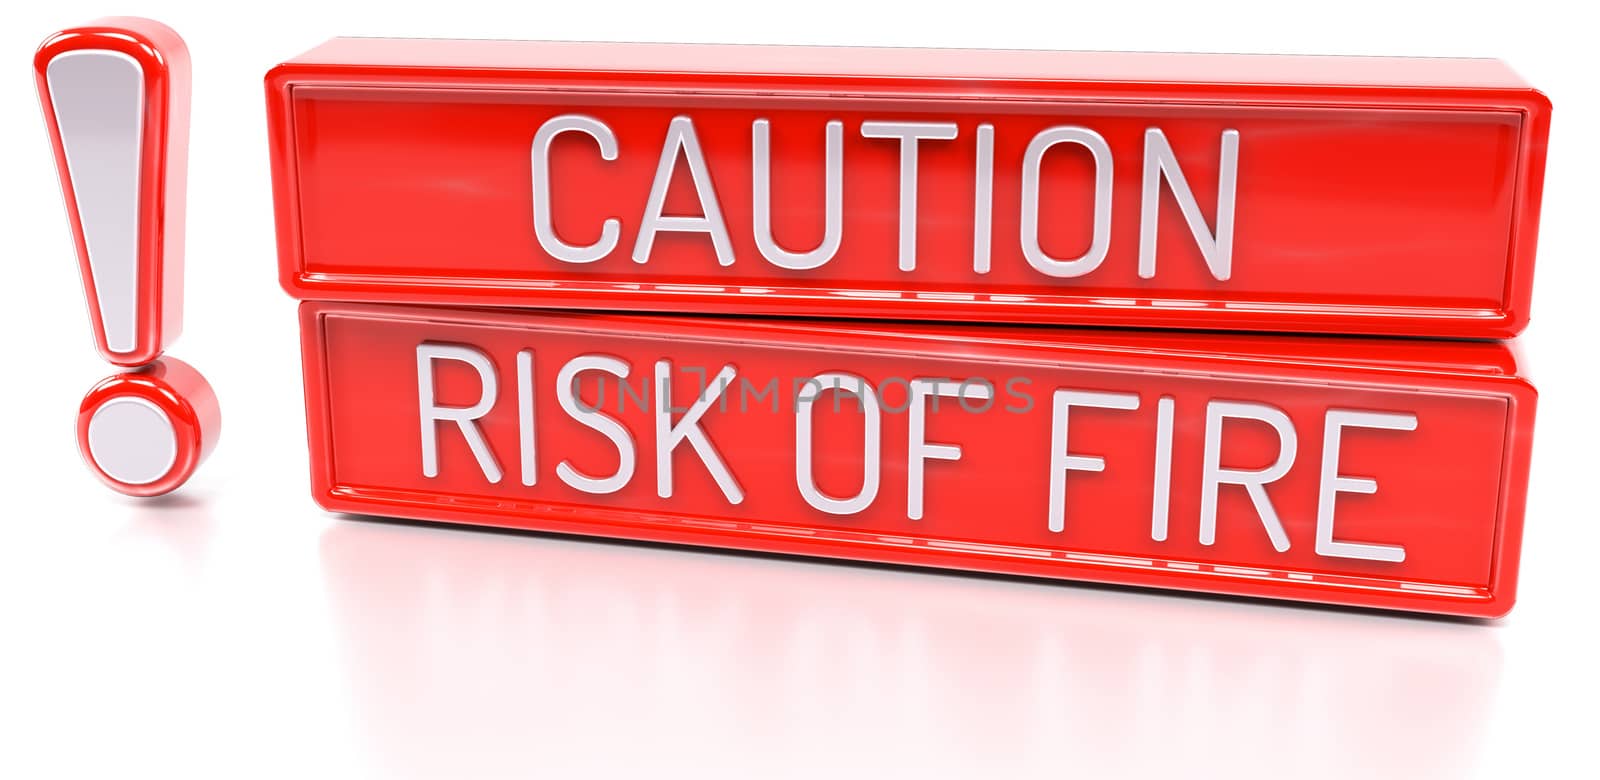 Caution, Risk of Fire - 3d banner, isolated on white background by akaprinay